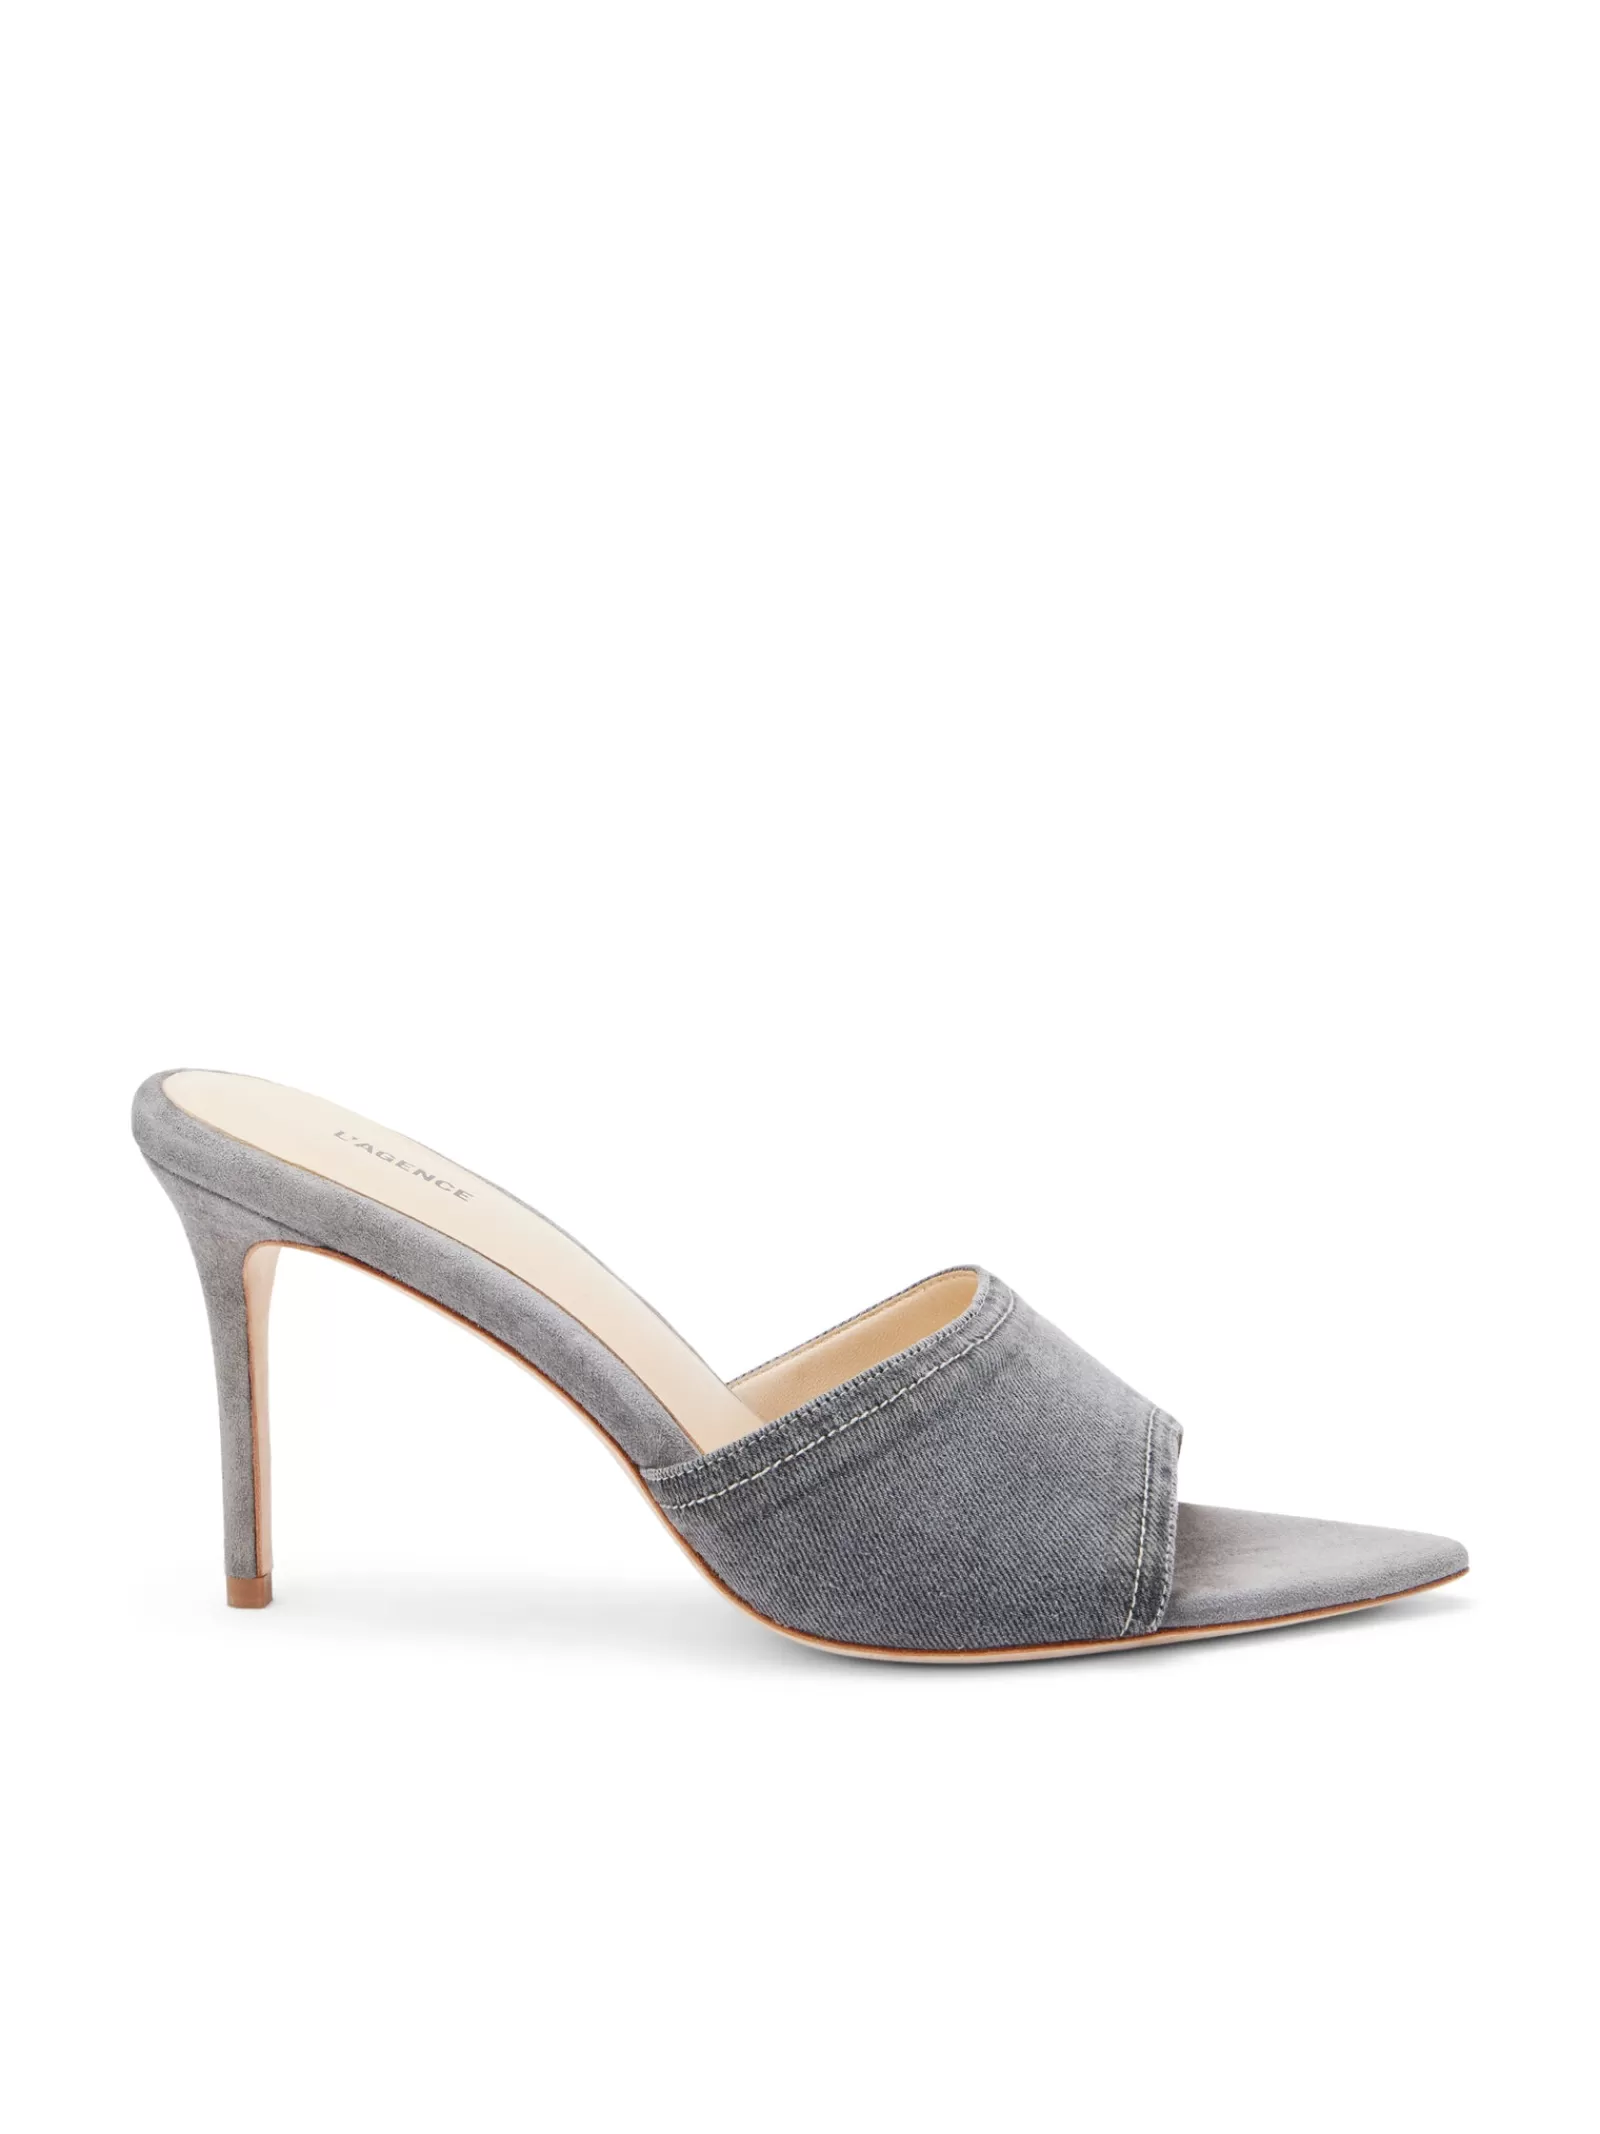 L'AGENCE Lolita Open Toe Mule< Resort Collection | Mules